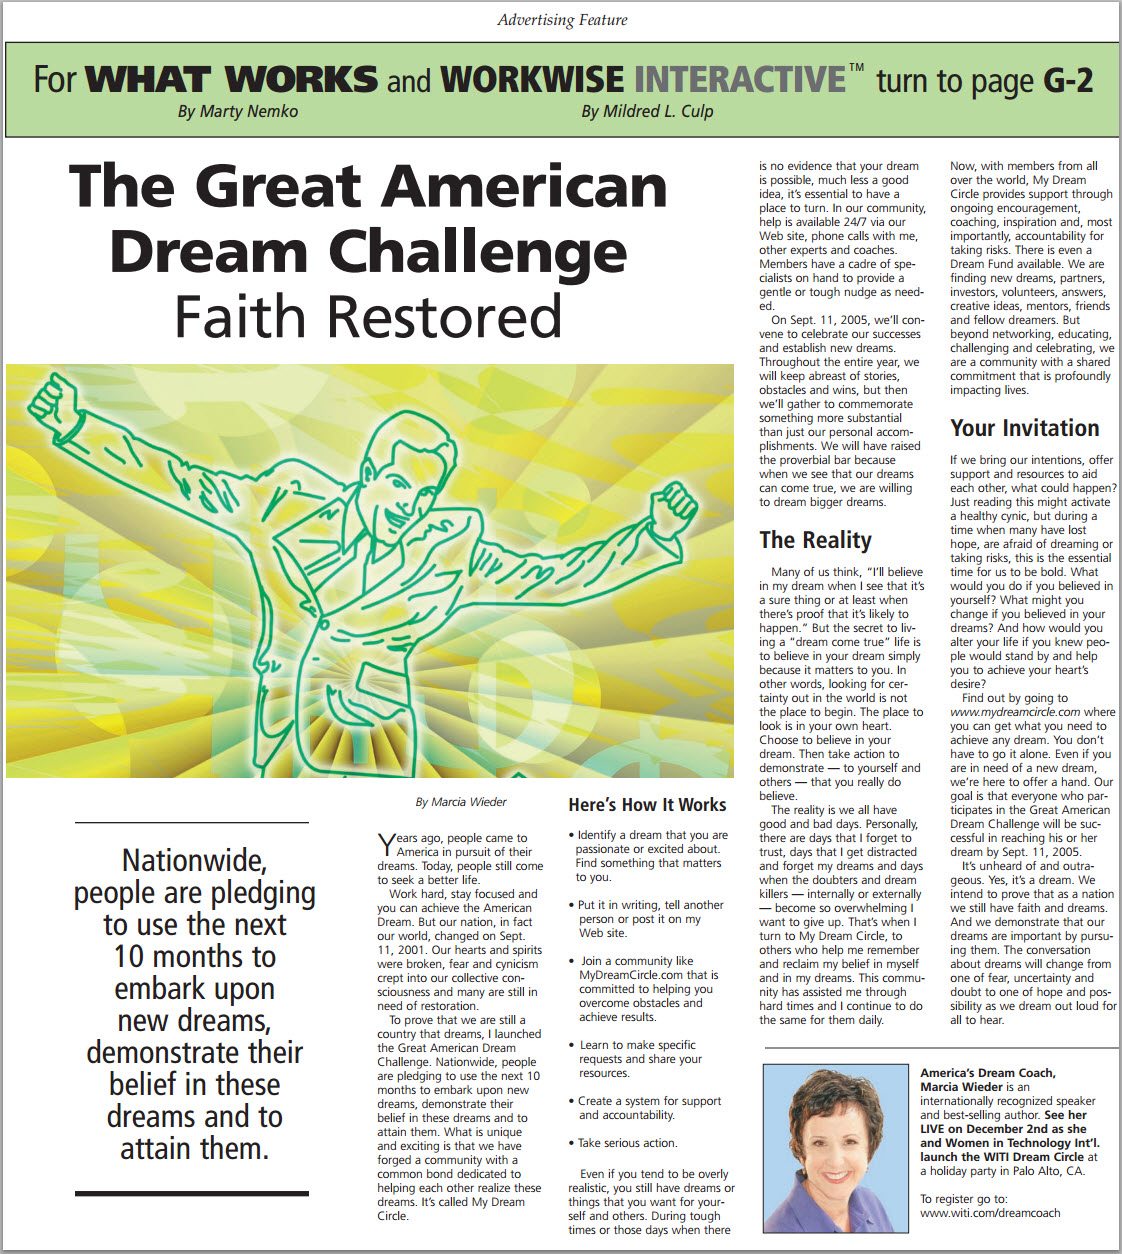 The Great American Dream Challenge - Faith Restored - SF Chronicle